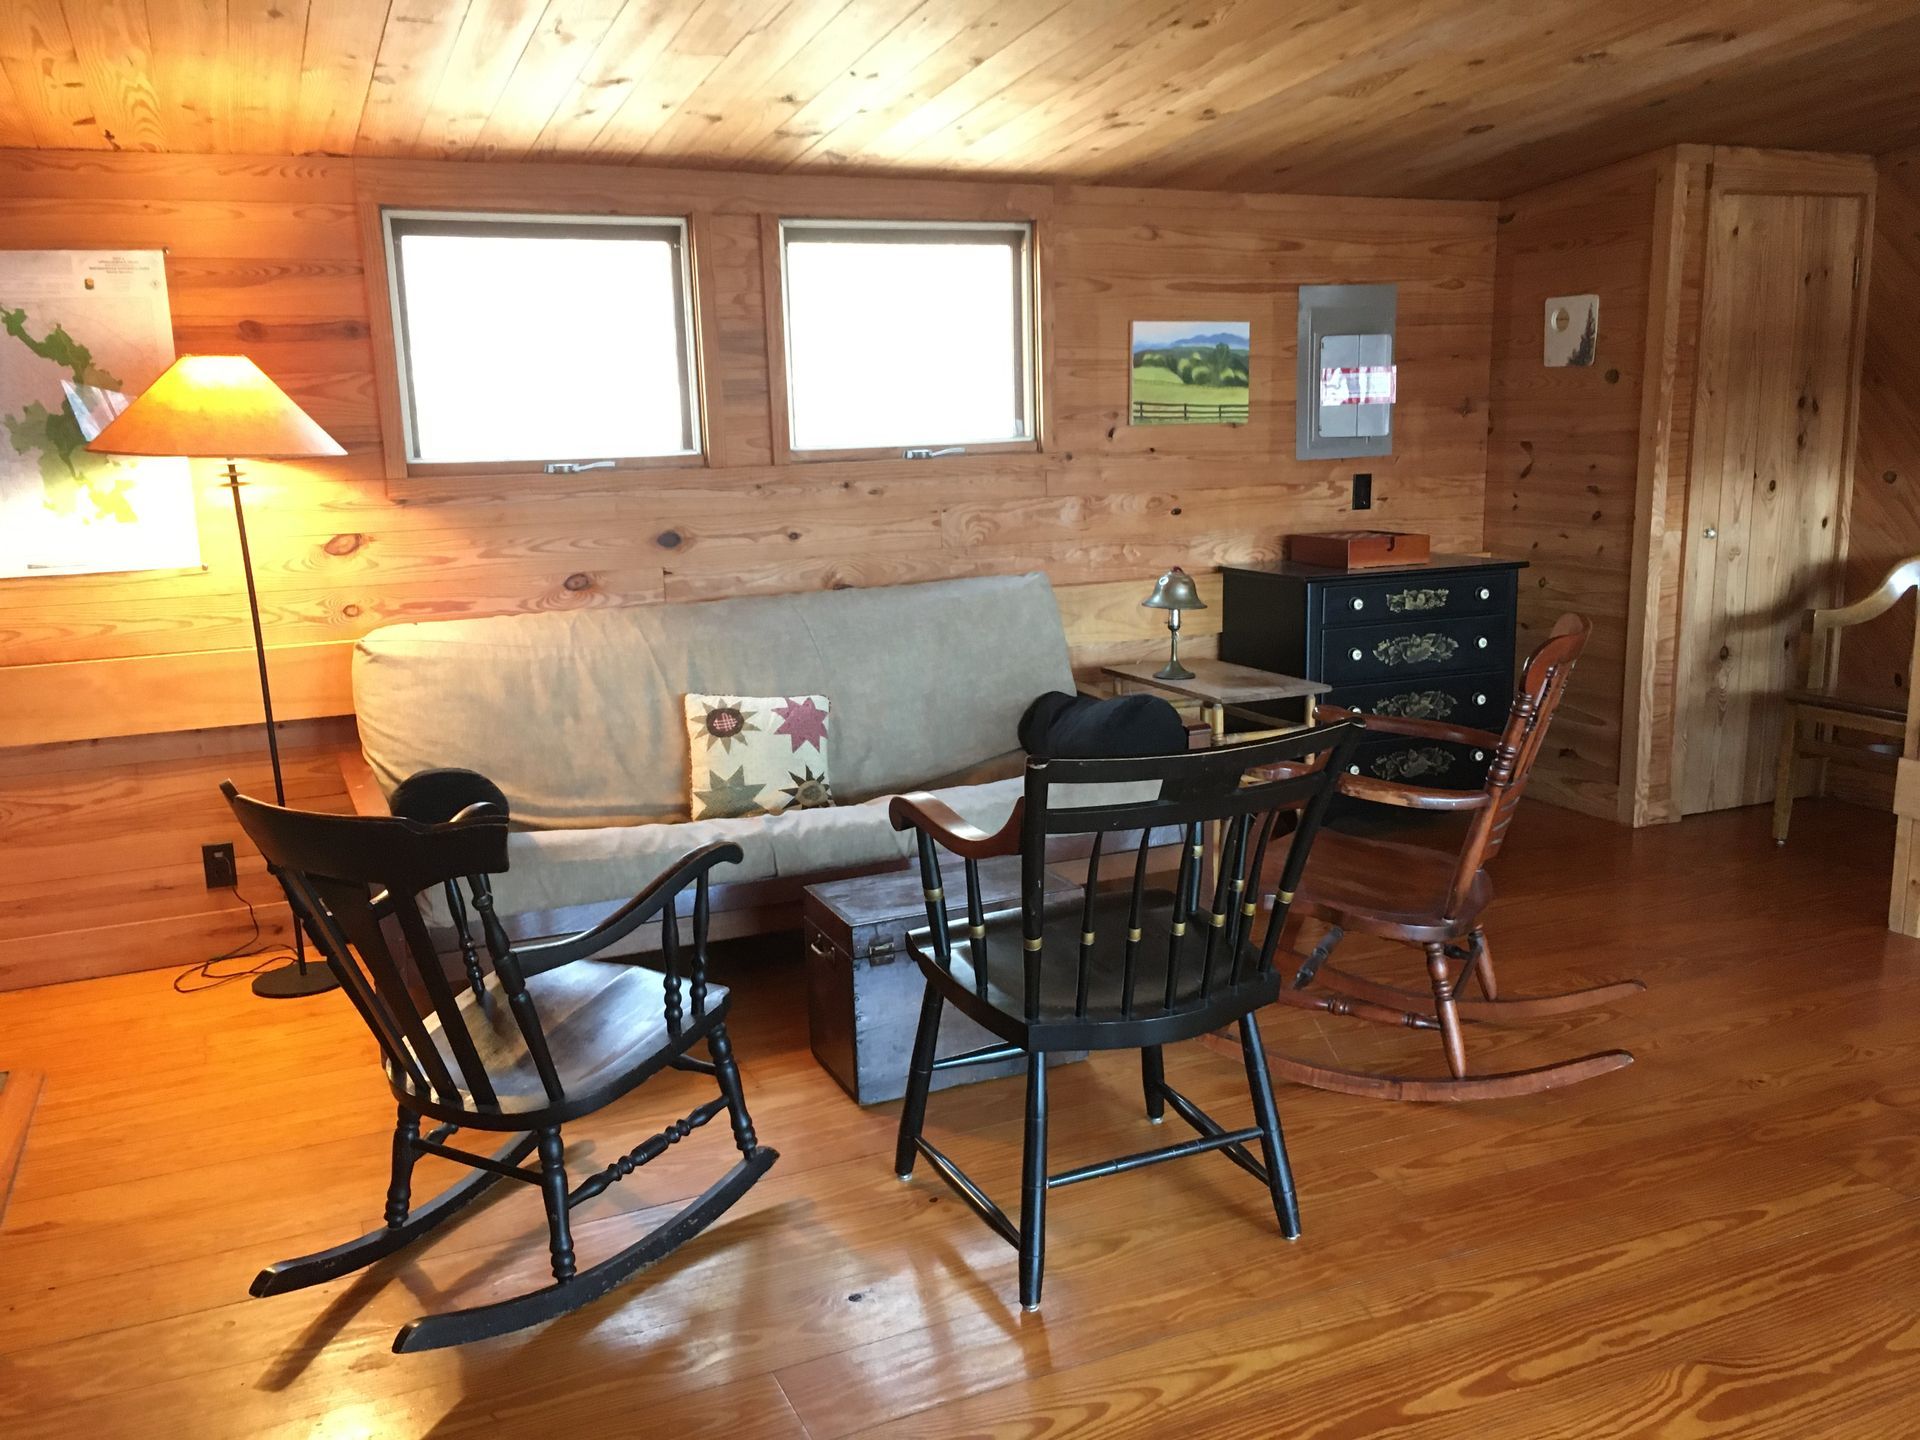 The interior of the Horwitz cabin showing a couch, a small table, and wooden chairs.